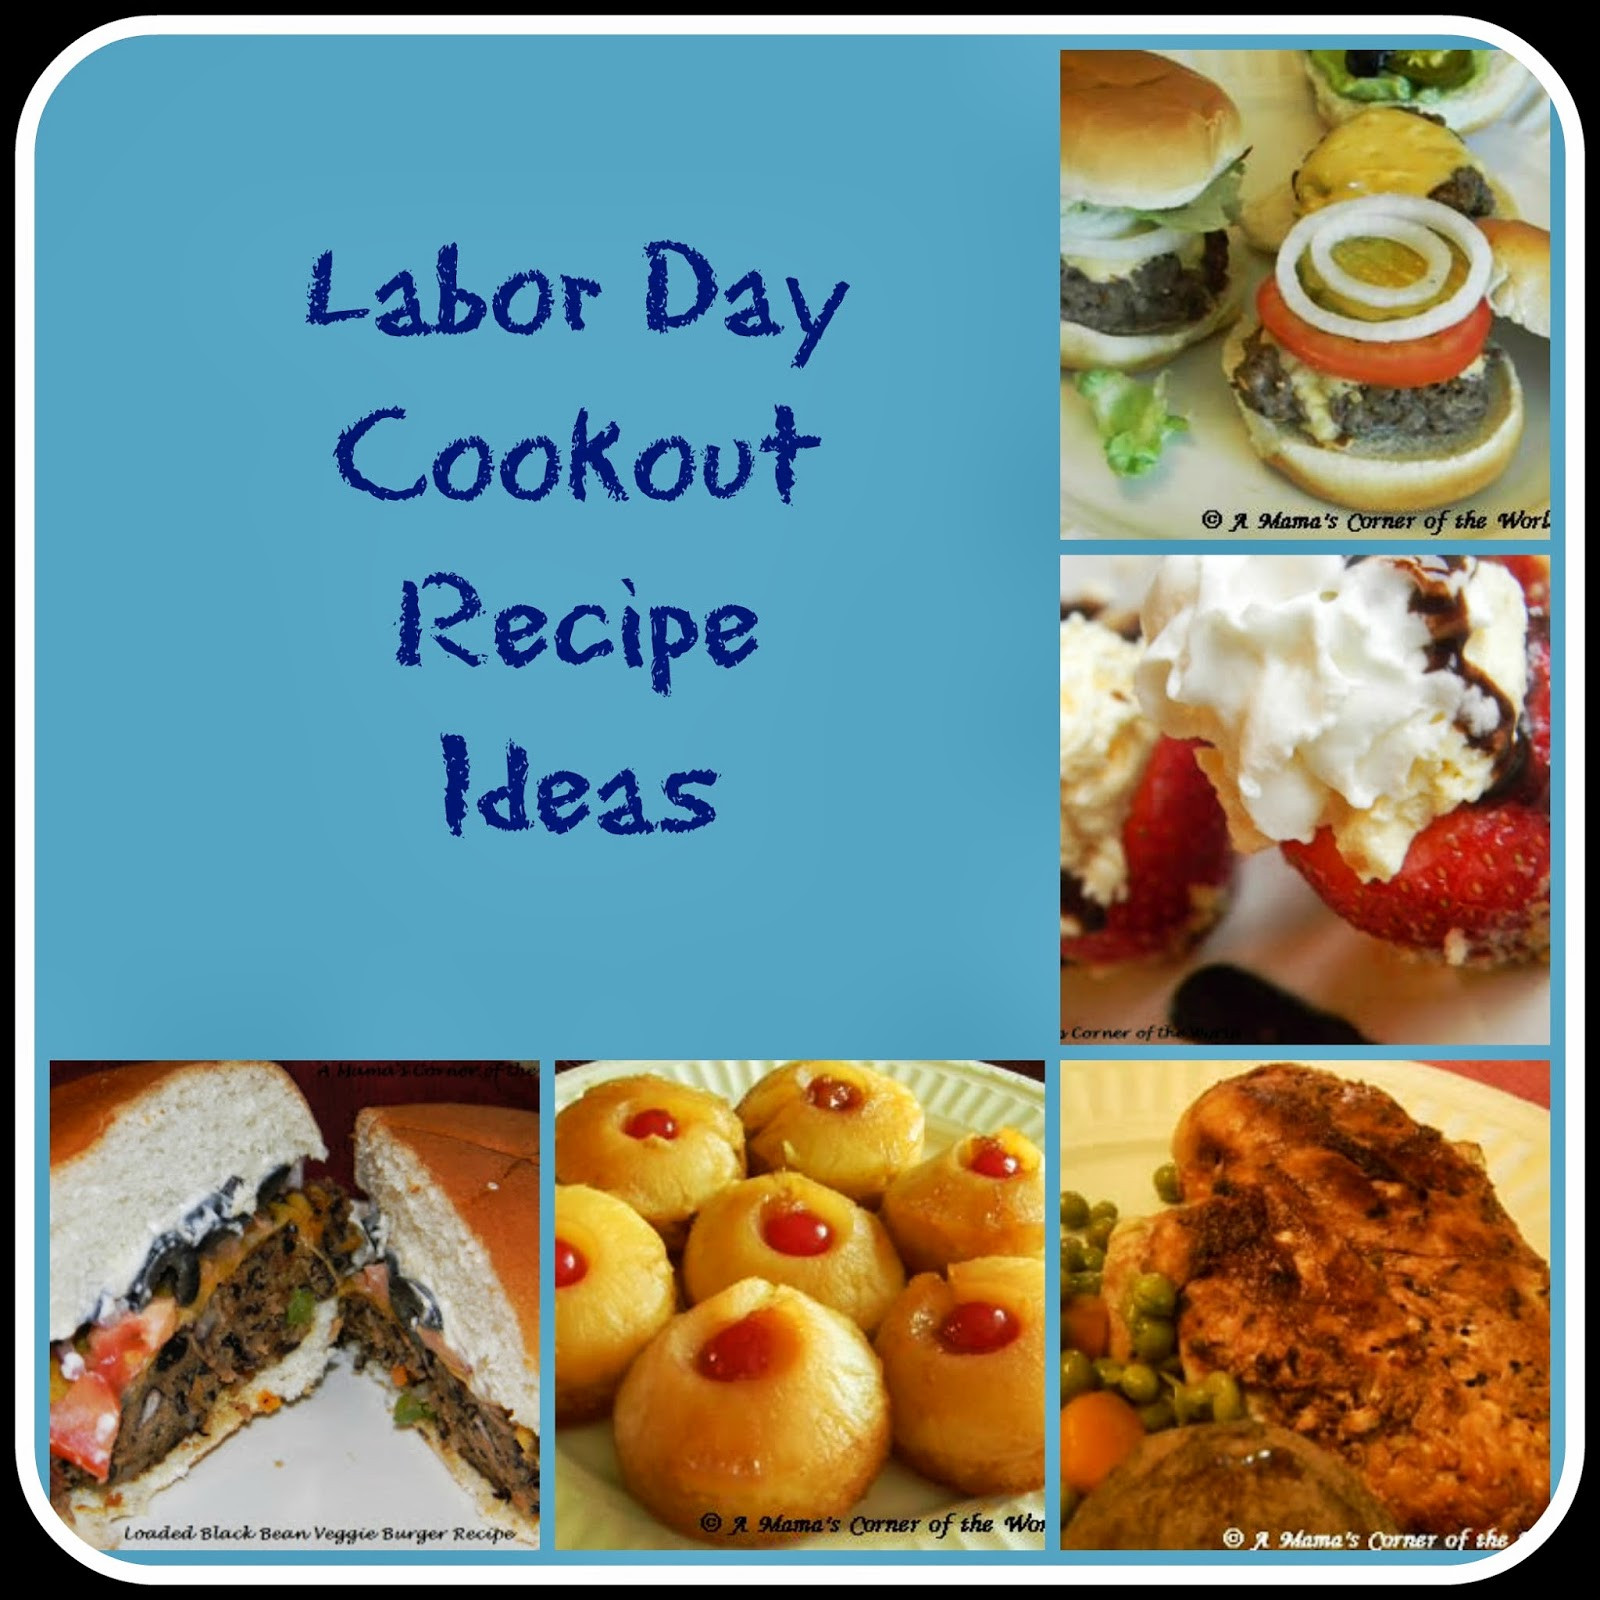 Labor Day Cookout Ideas
 Labor Day Cookout Recipe Ideas A Mama s Corner of the World